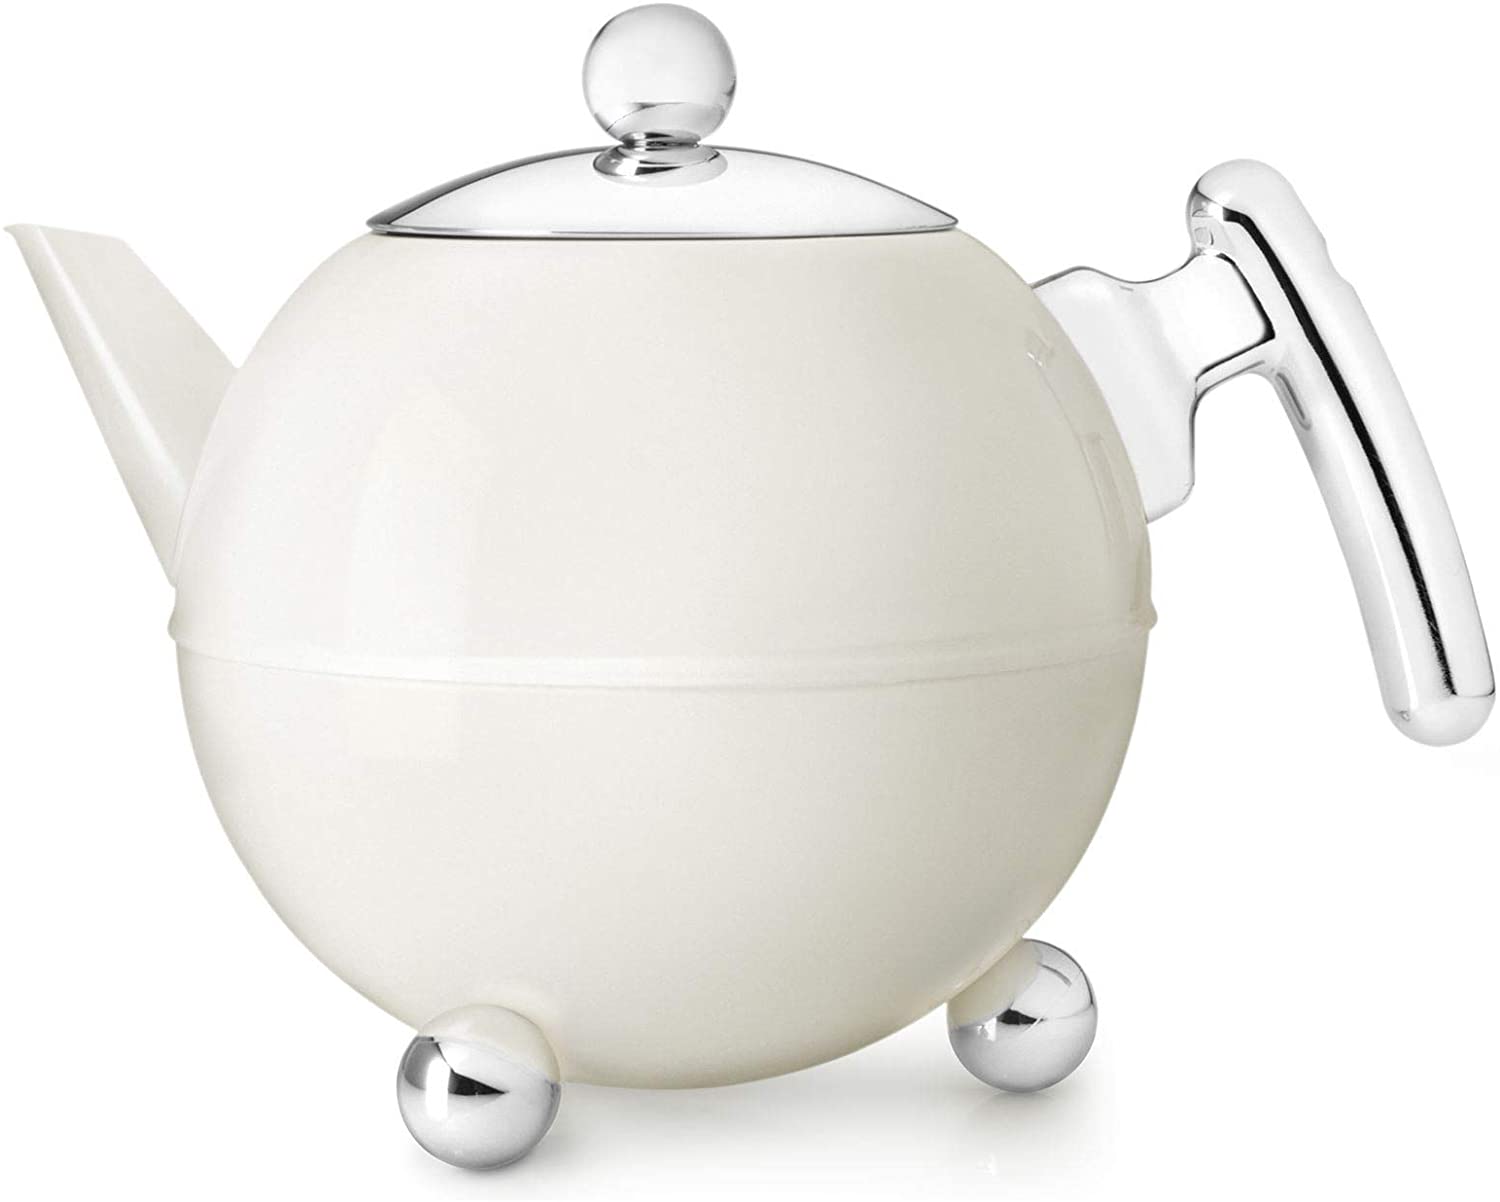 Bredemeijer 1.2 L Stainless Steel Teapot Bella Ronde with Chromium Fittings, White